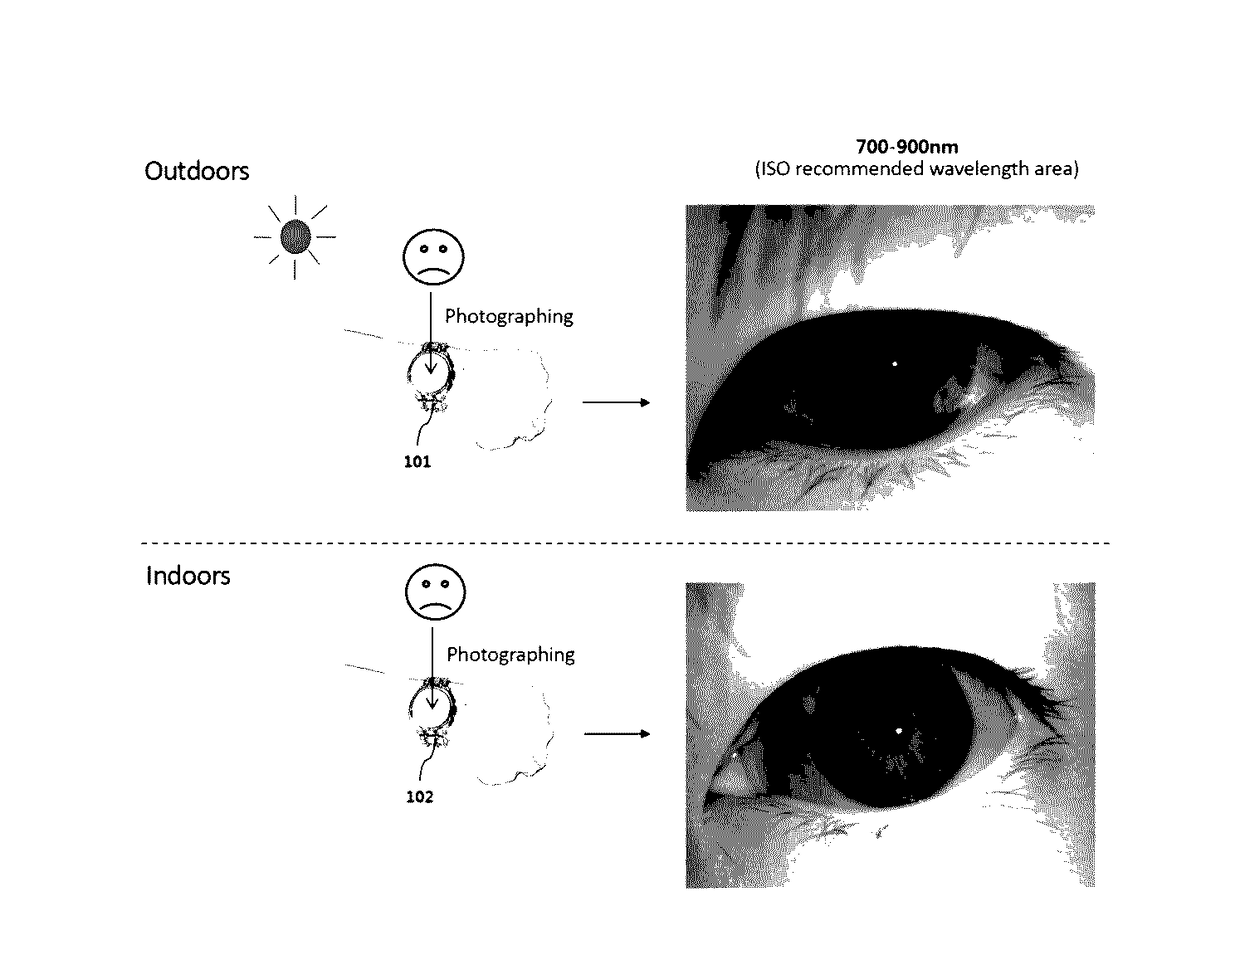 Hand-attachable wearable device capable of iris recognition indoors and/or outdoors